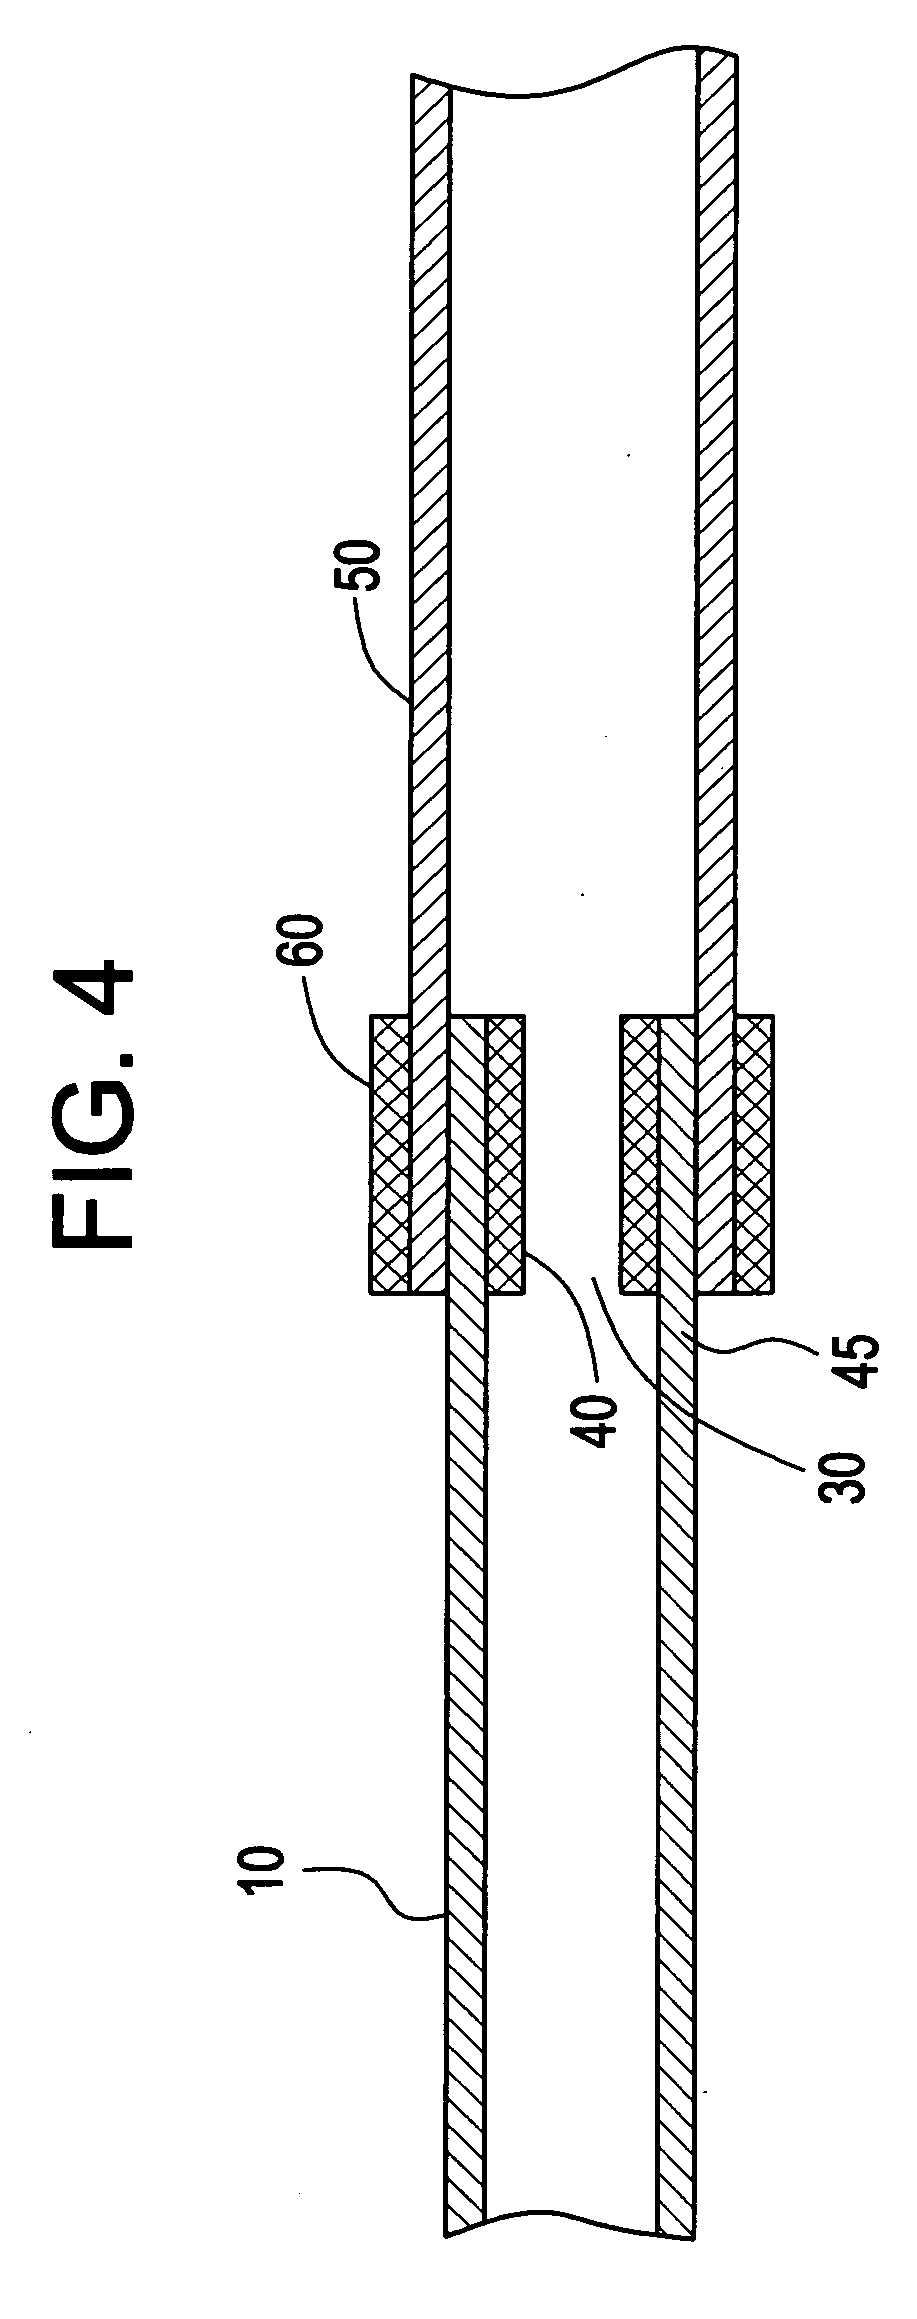 Method and system of attaching vessels to grafts